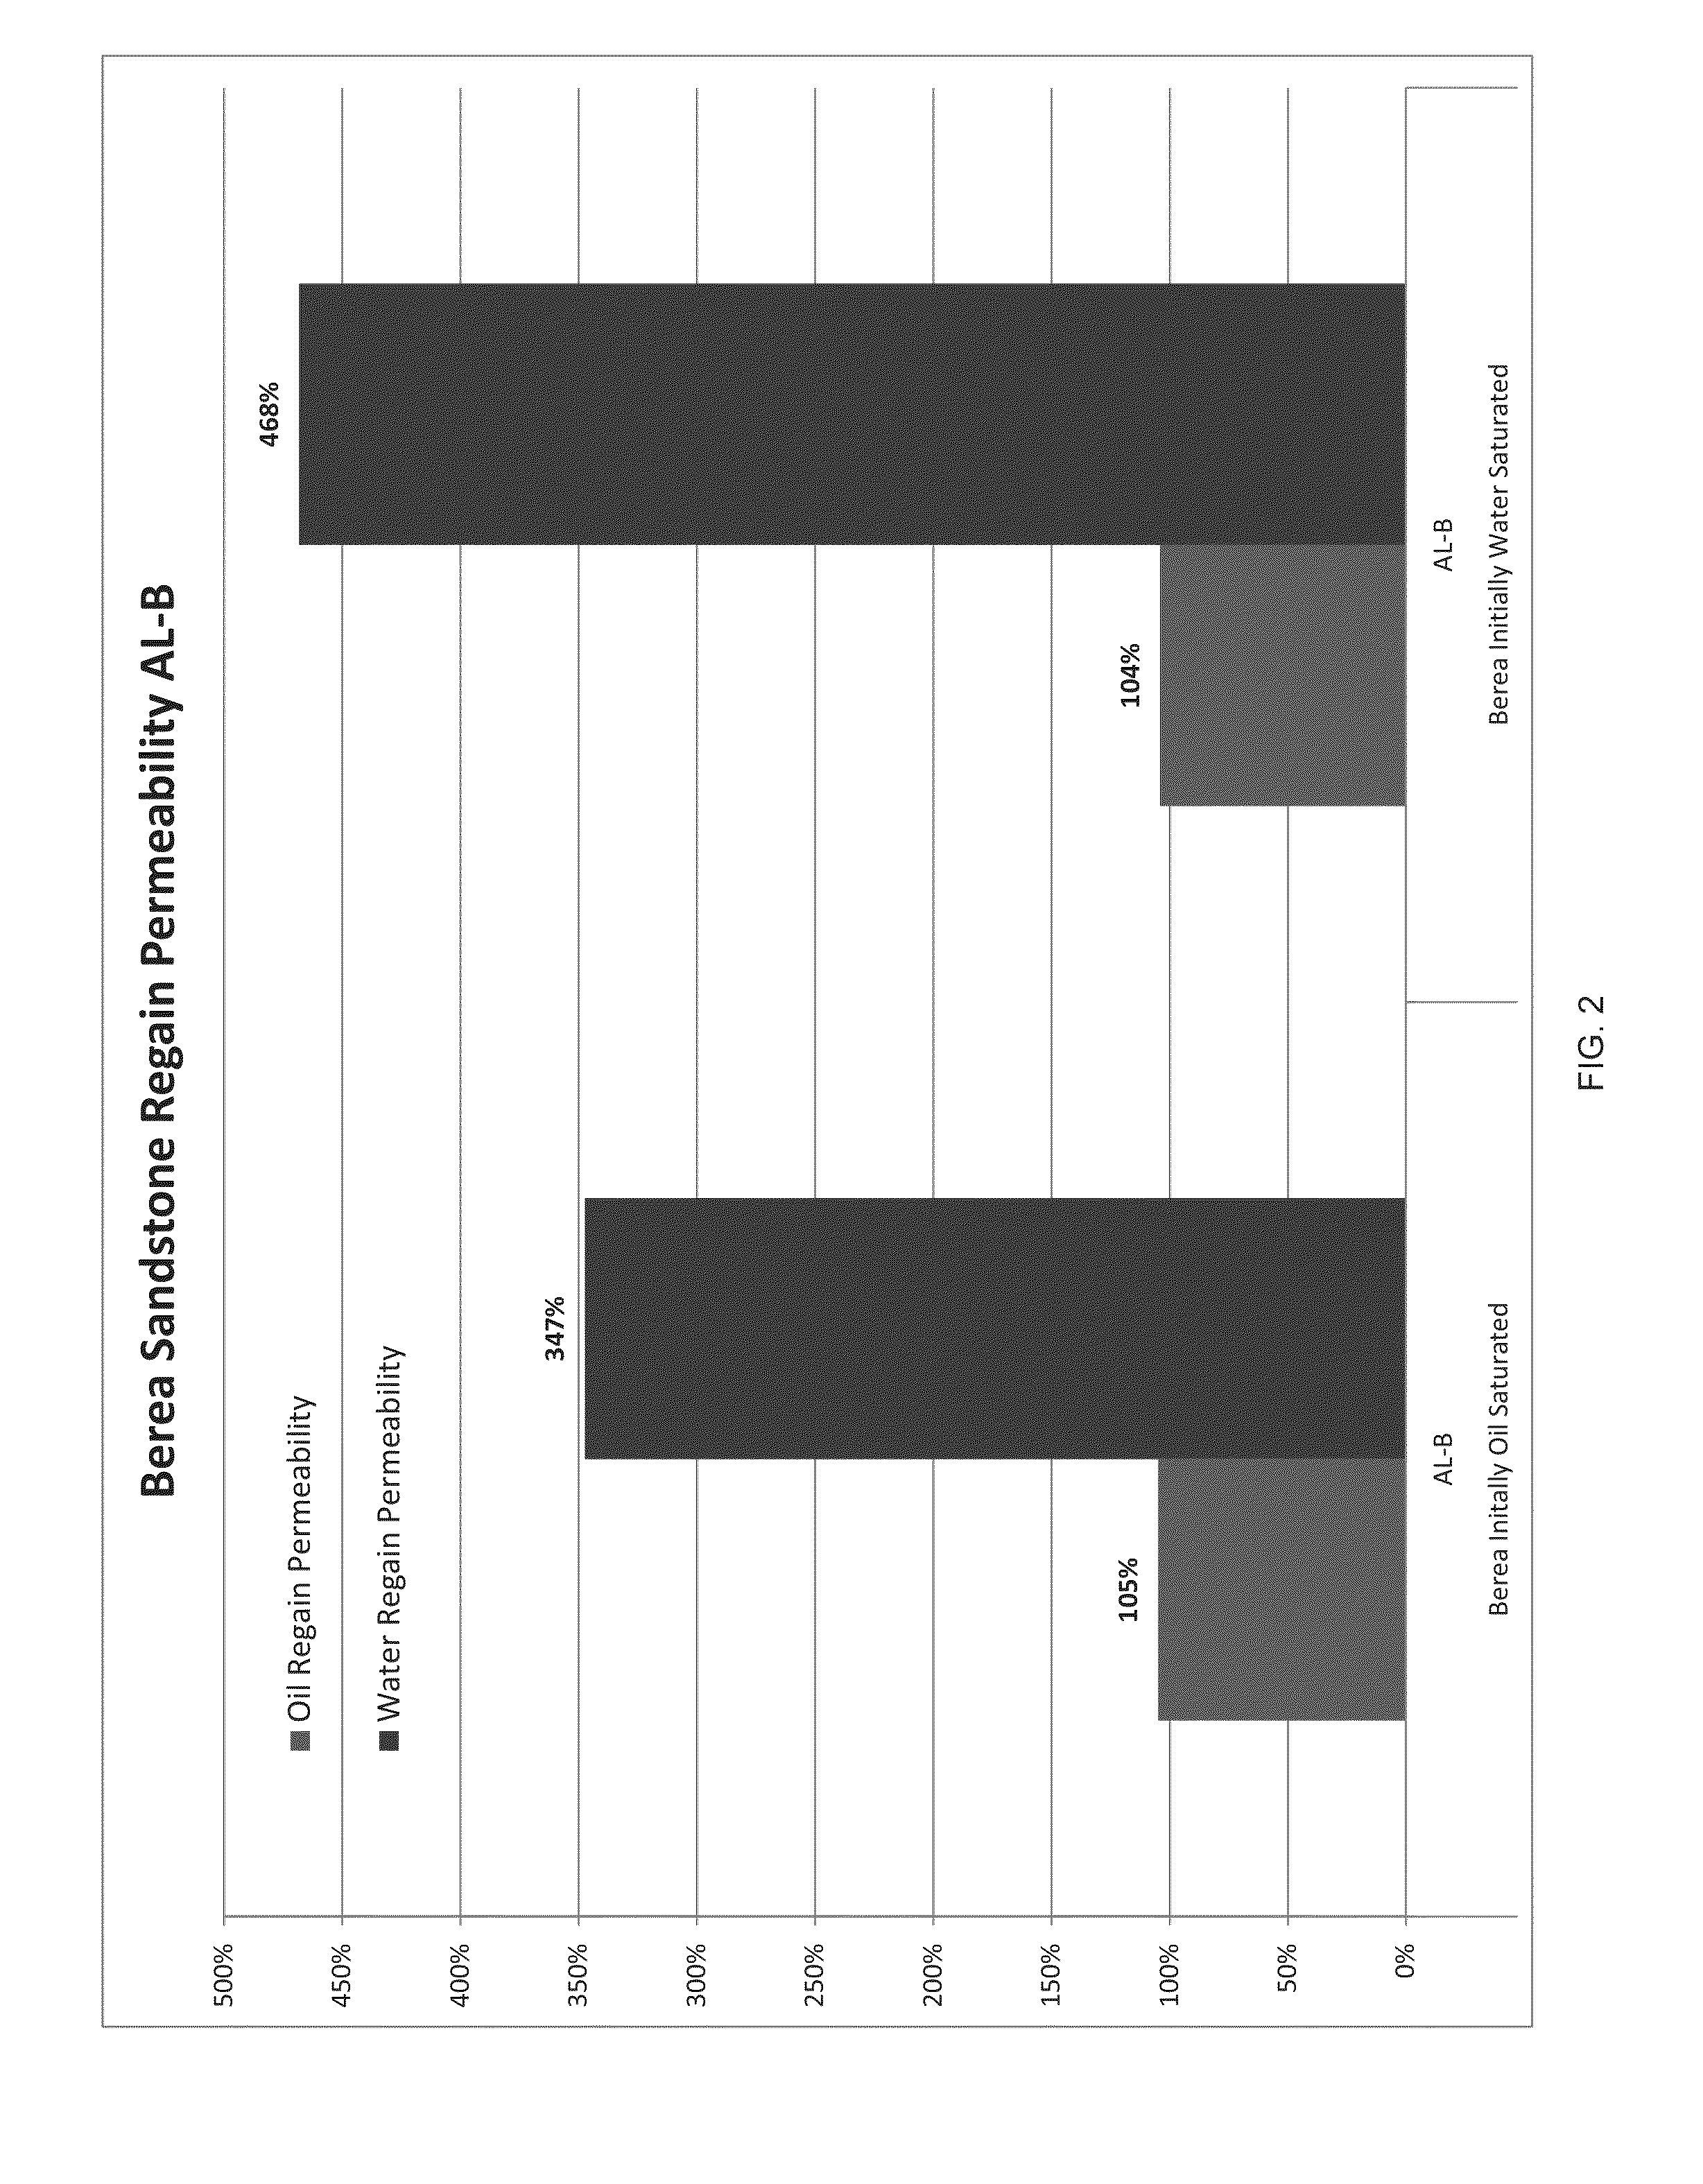 Method of using surface modifying treatment agents to treat subterranean formations